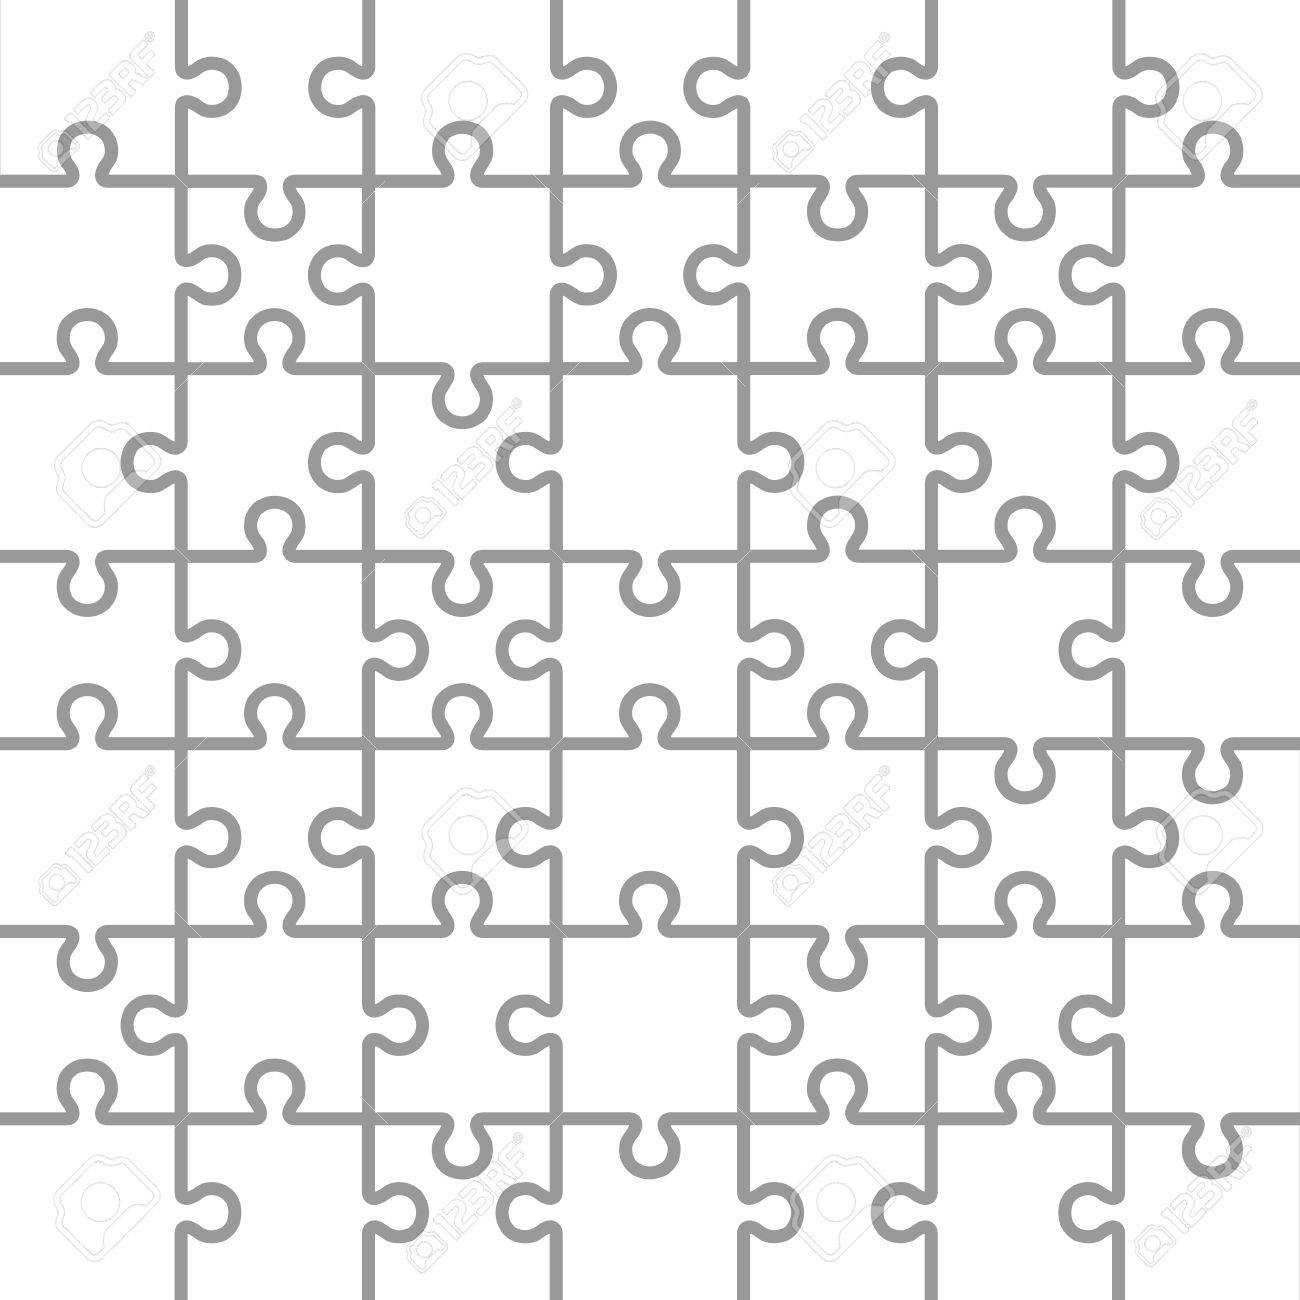 Jigsaw Puzzle White Blank Parts Template. 7X7 Pieces. Regarding Blank Jigsaw Piece Template